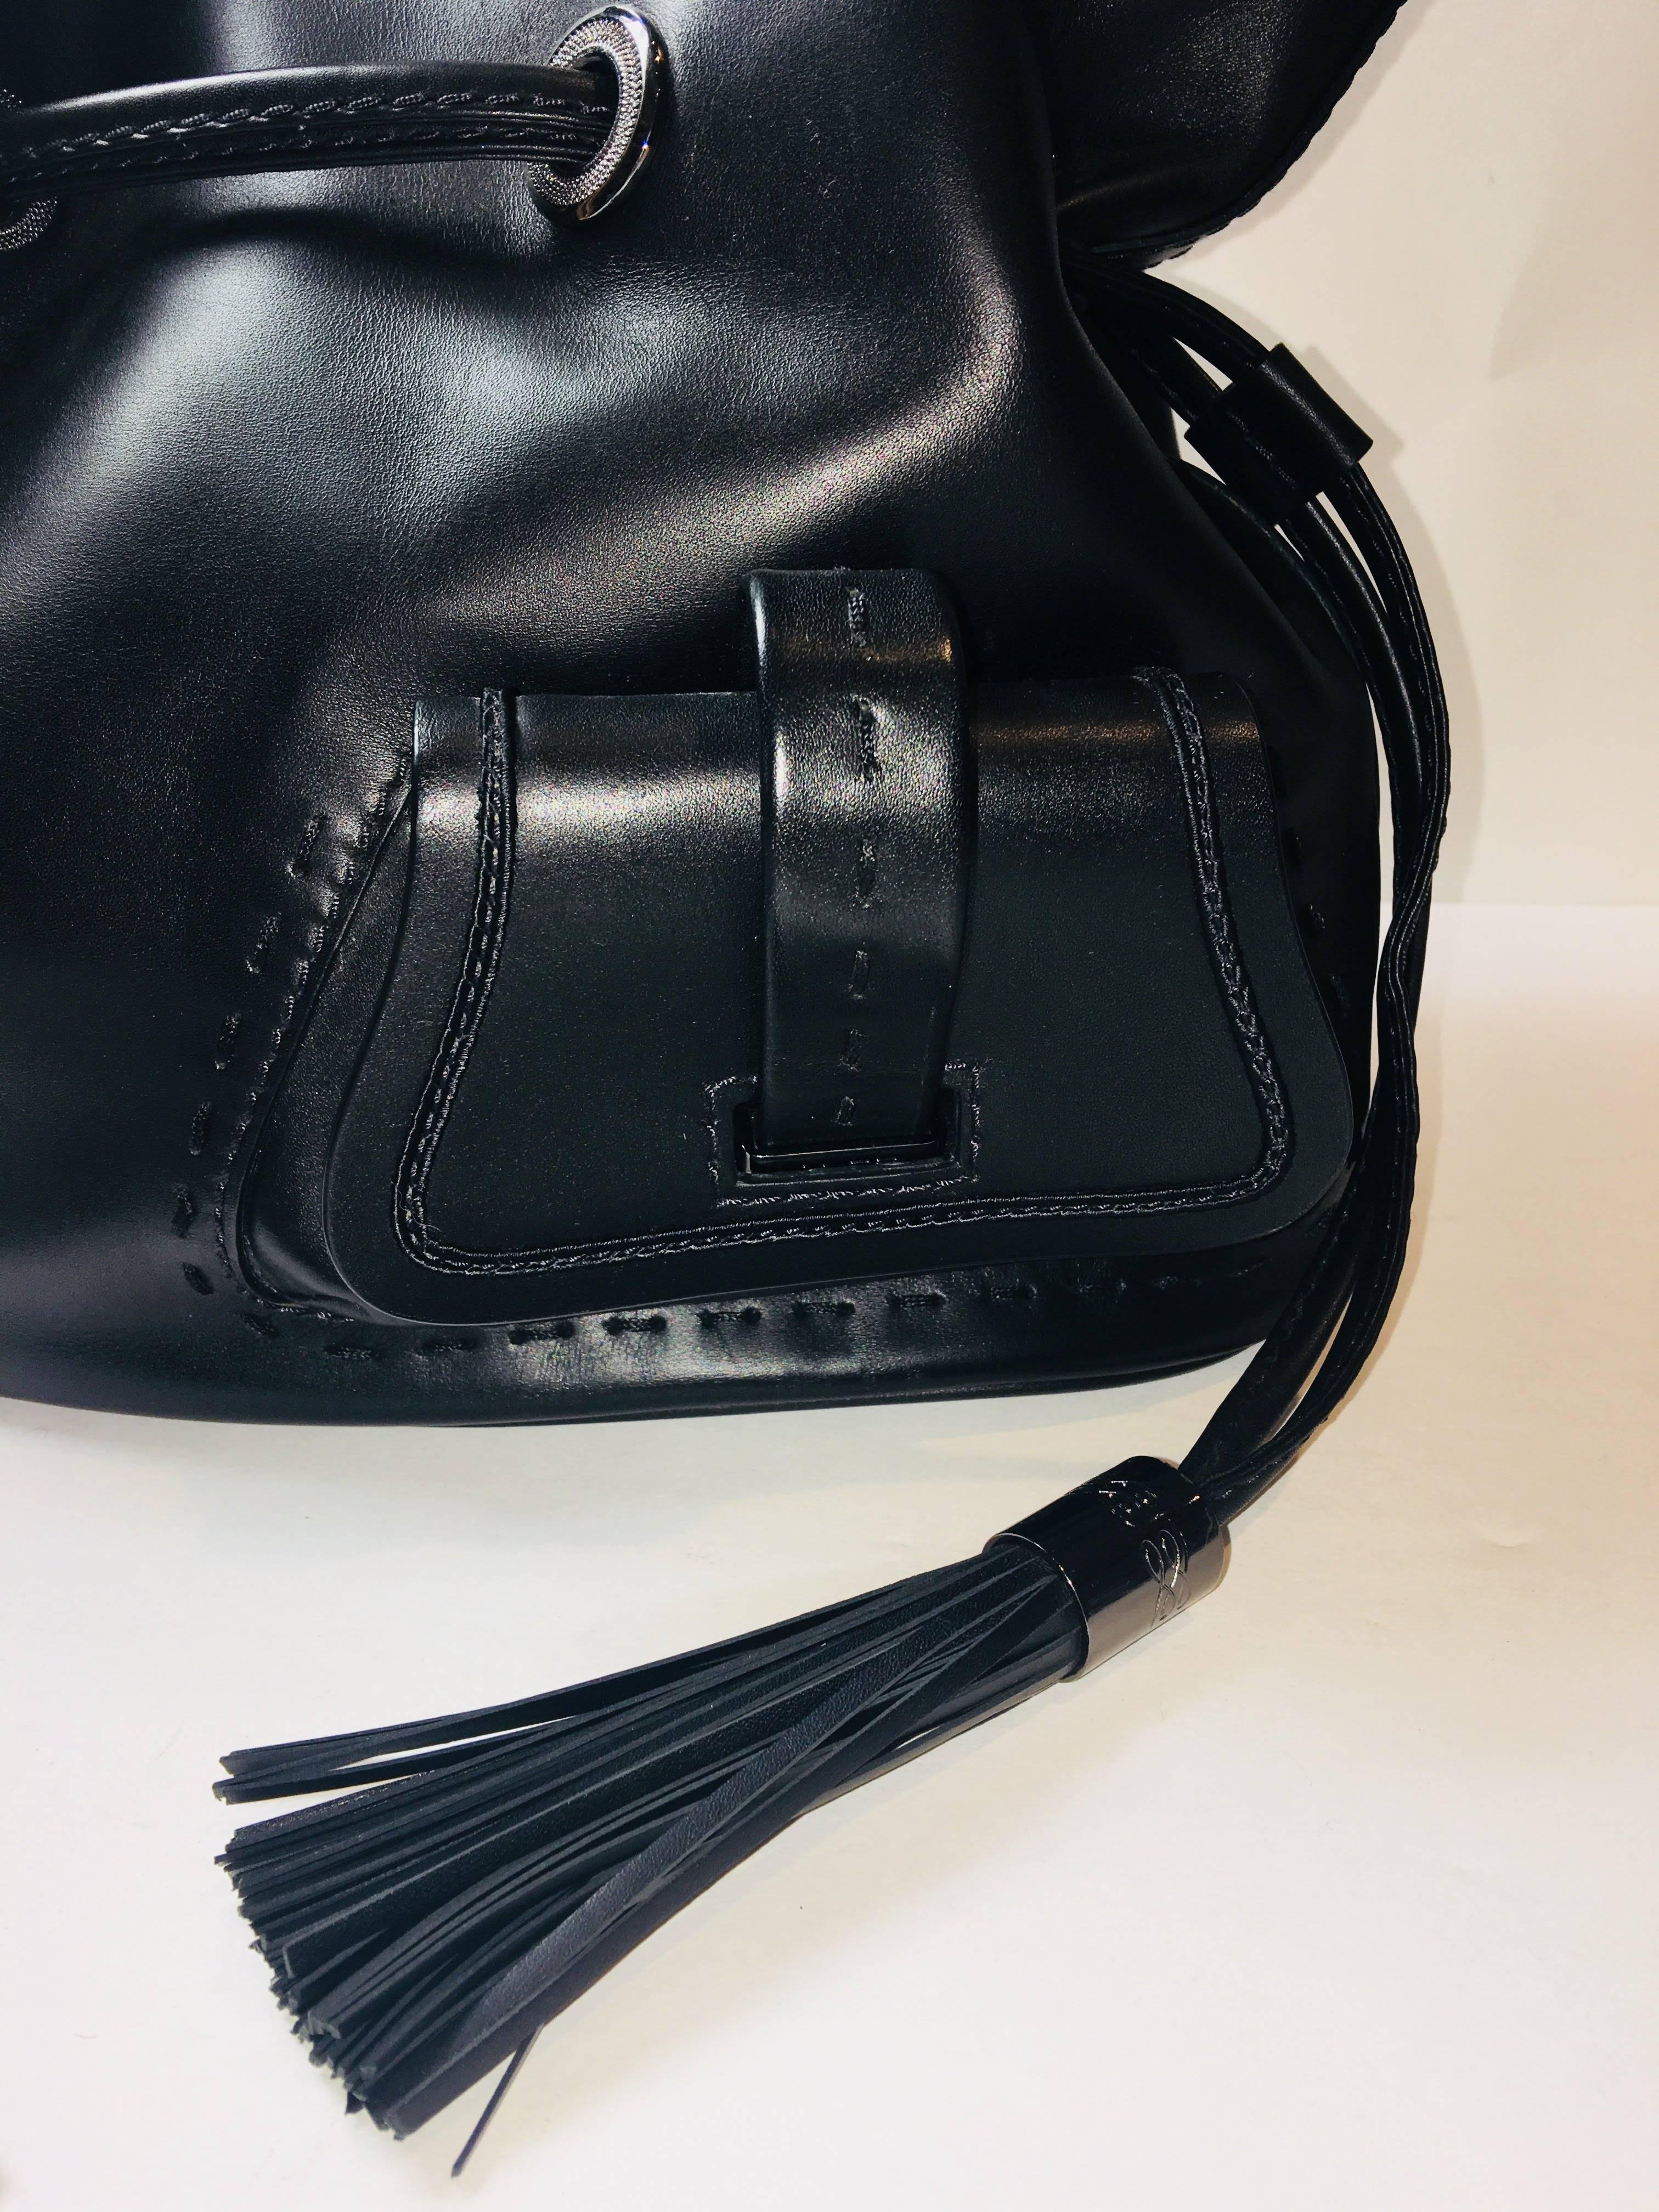 Lancel Double Handle Top Bag with Removable Crossbody Strap, Cinched Sides with Tassel.